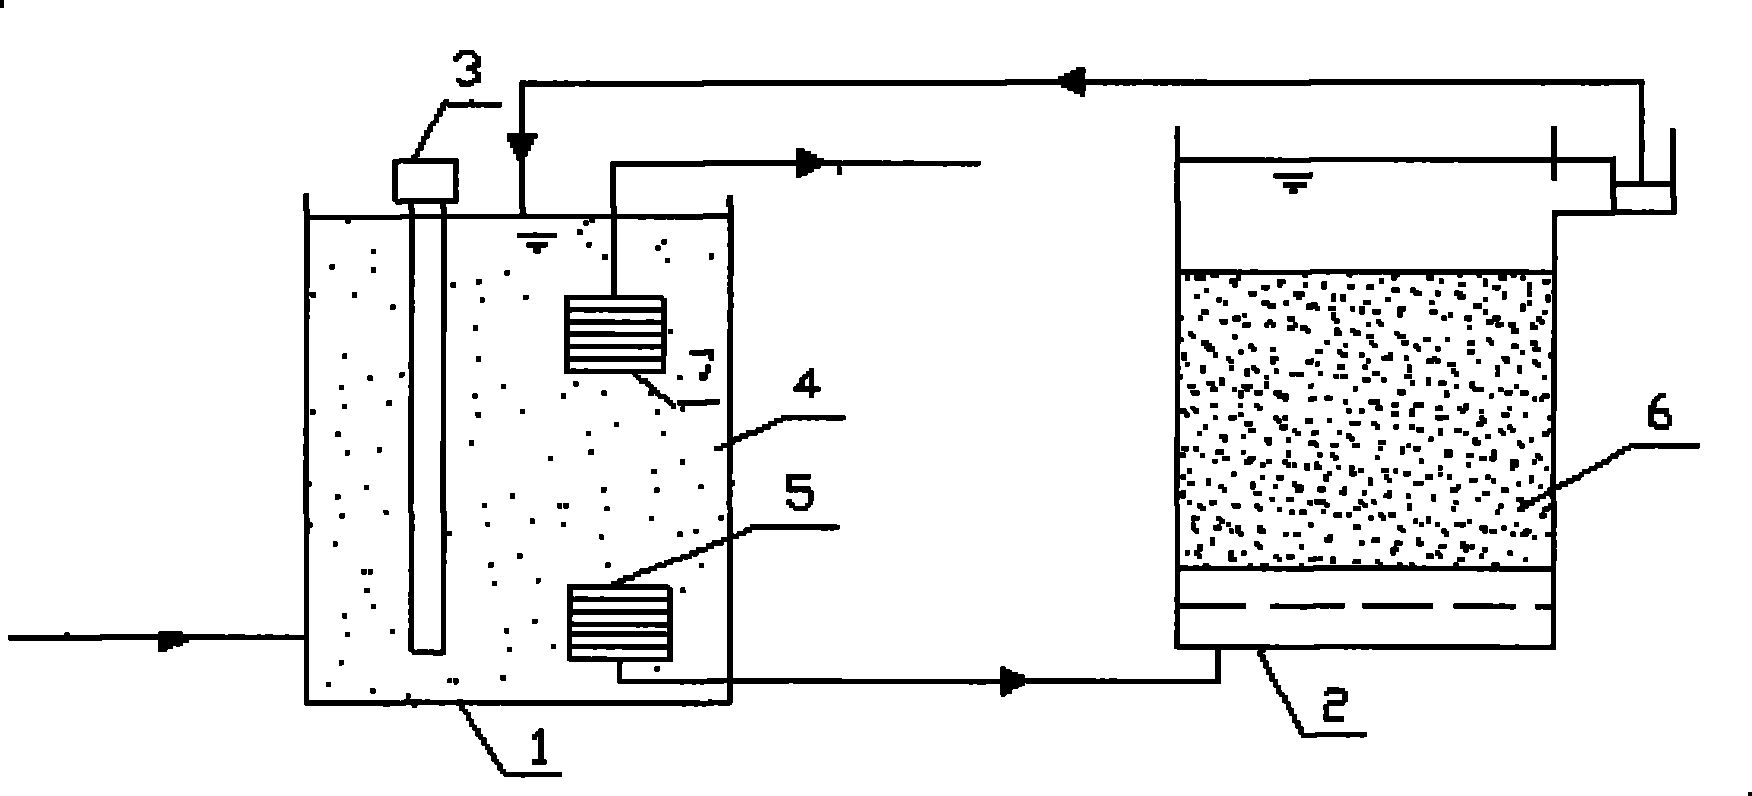 Photocatalysis and biotreatment combined drinking water treatment method